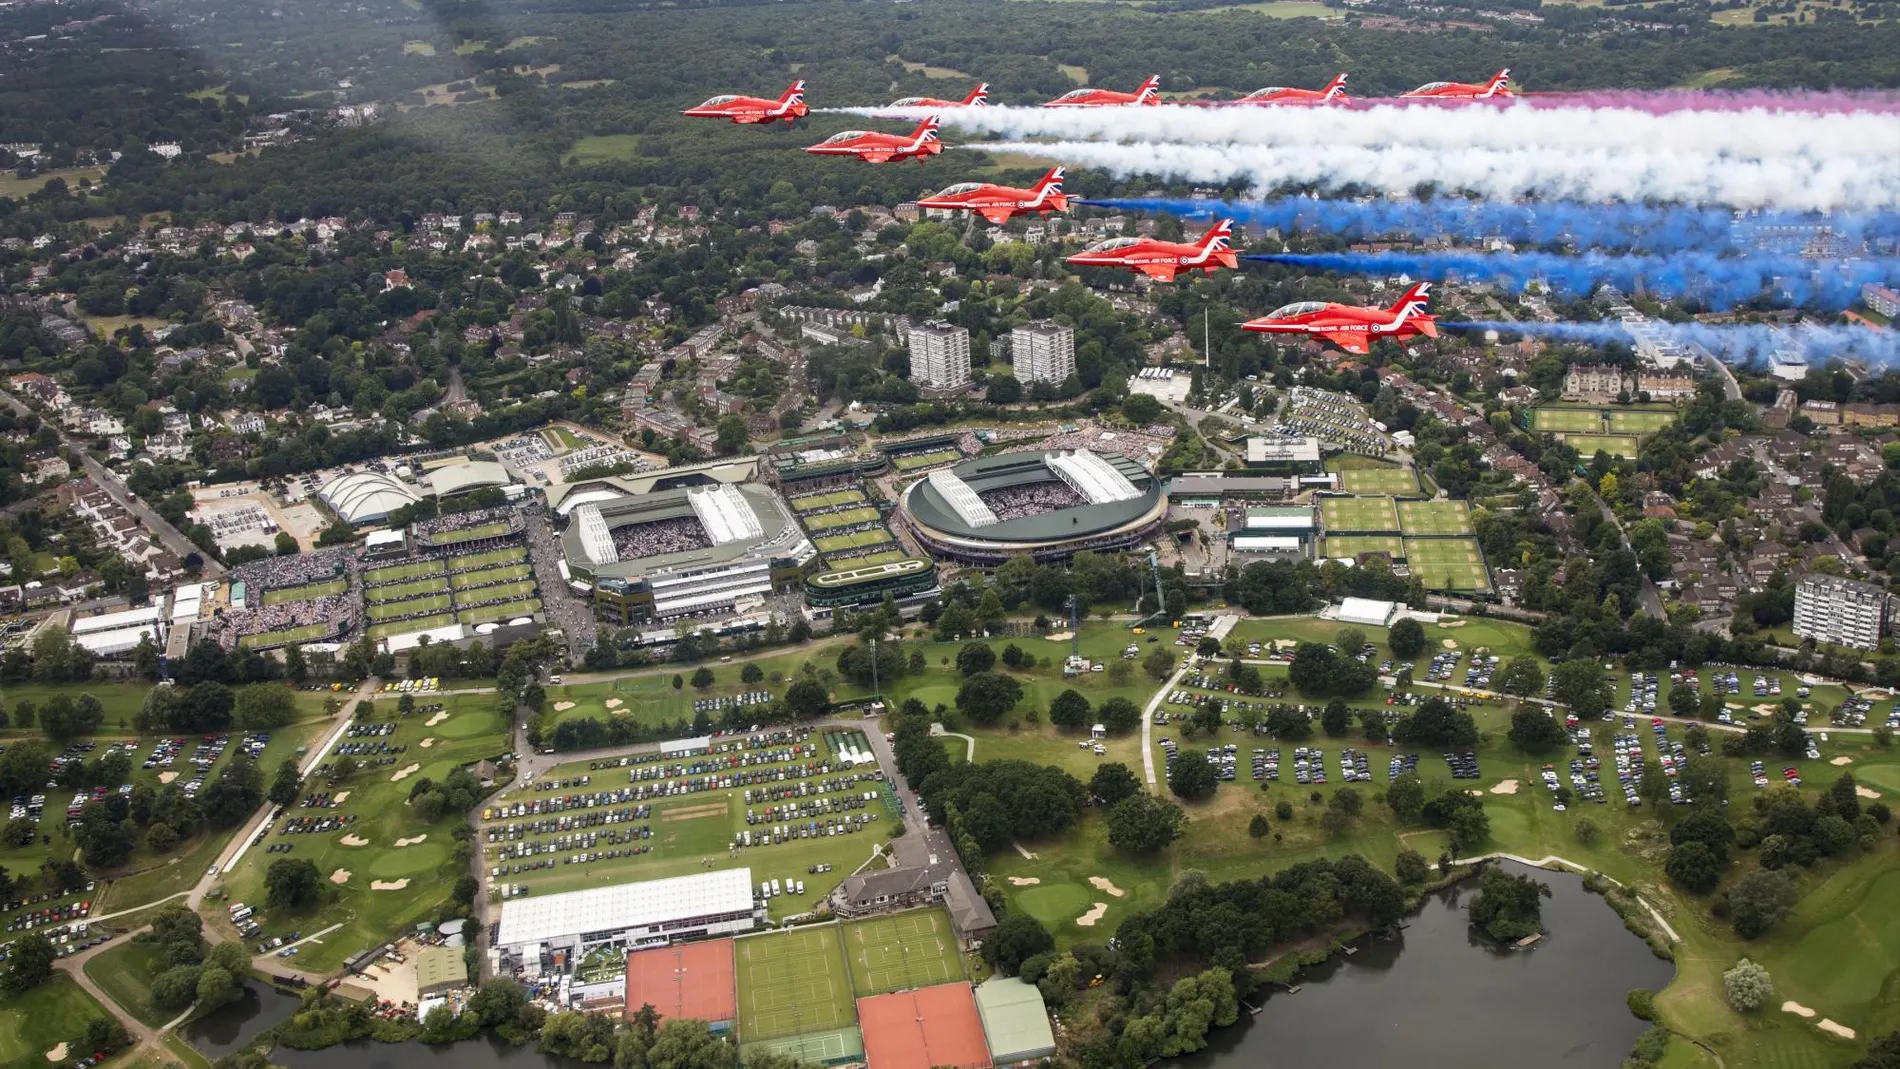 [showing the British Royal Air Force Aerobatic Team, the Red Arrows fly over Wimbledon Tennis Championship]